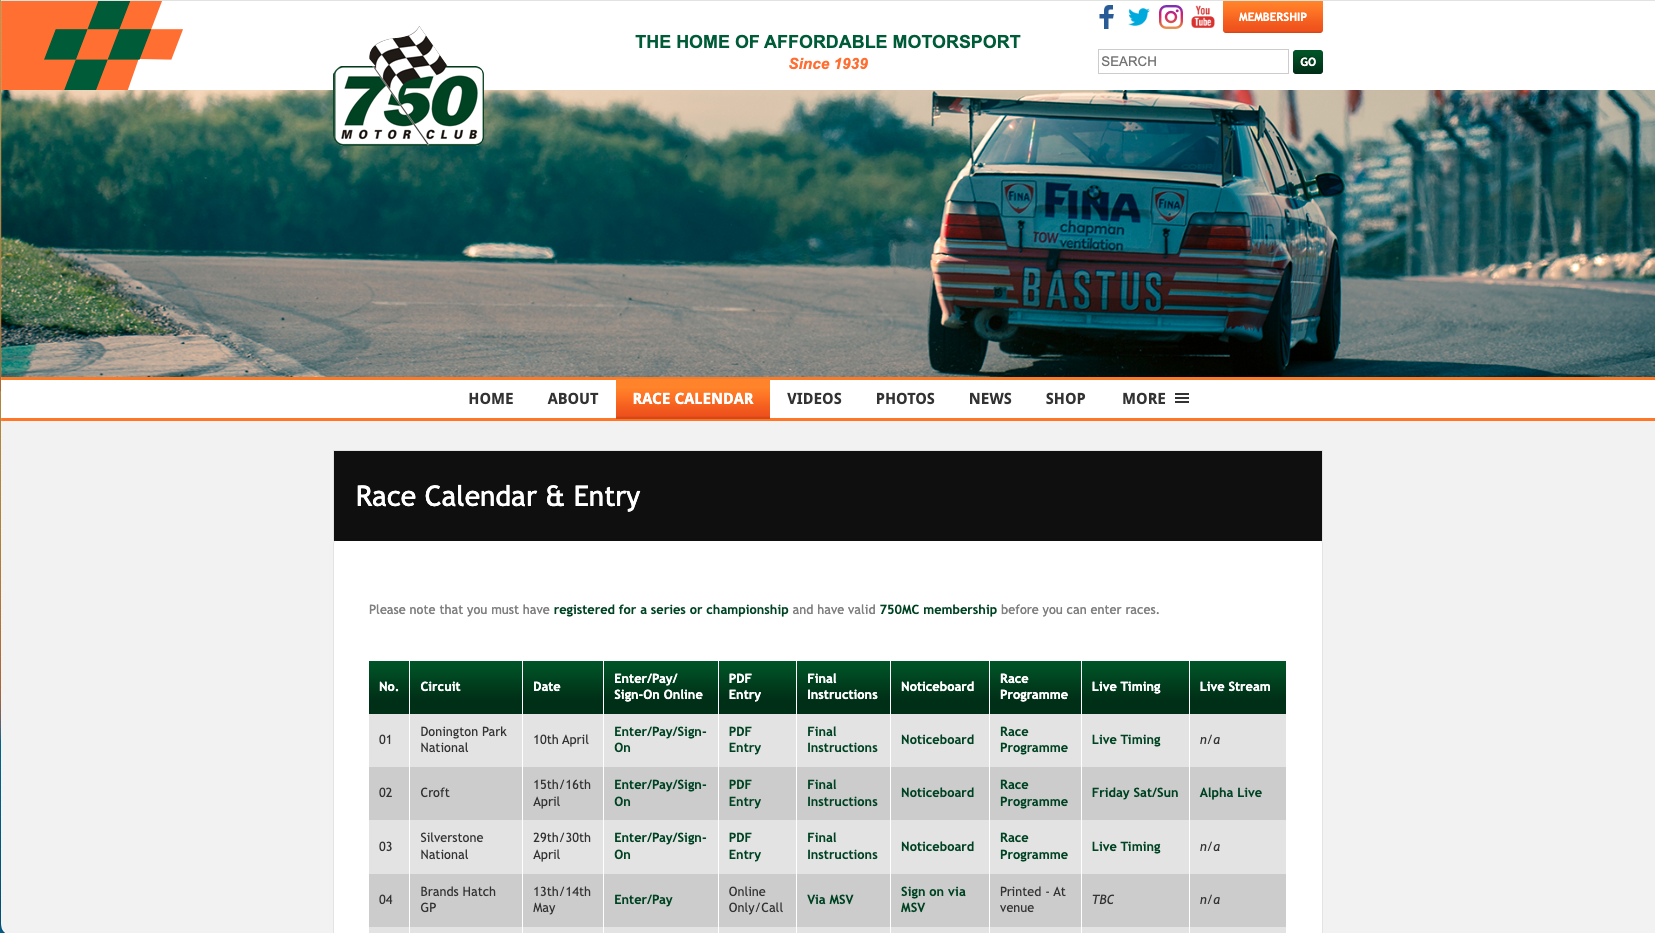 Screenshot of the 750 motorclub motorsport website showing a table / events calendar showing details of upcoming races and associated information.